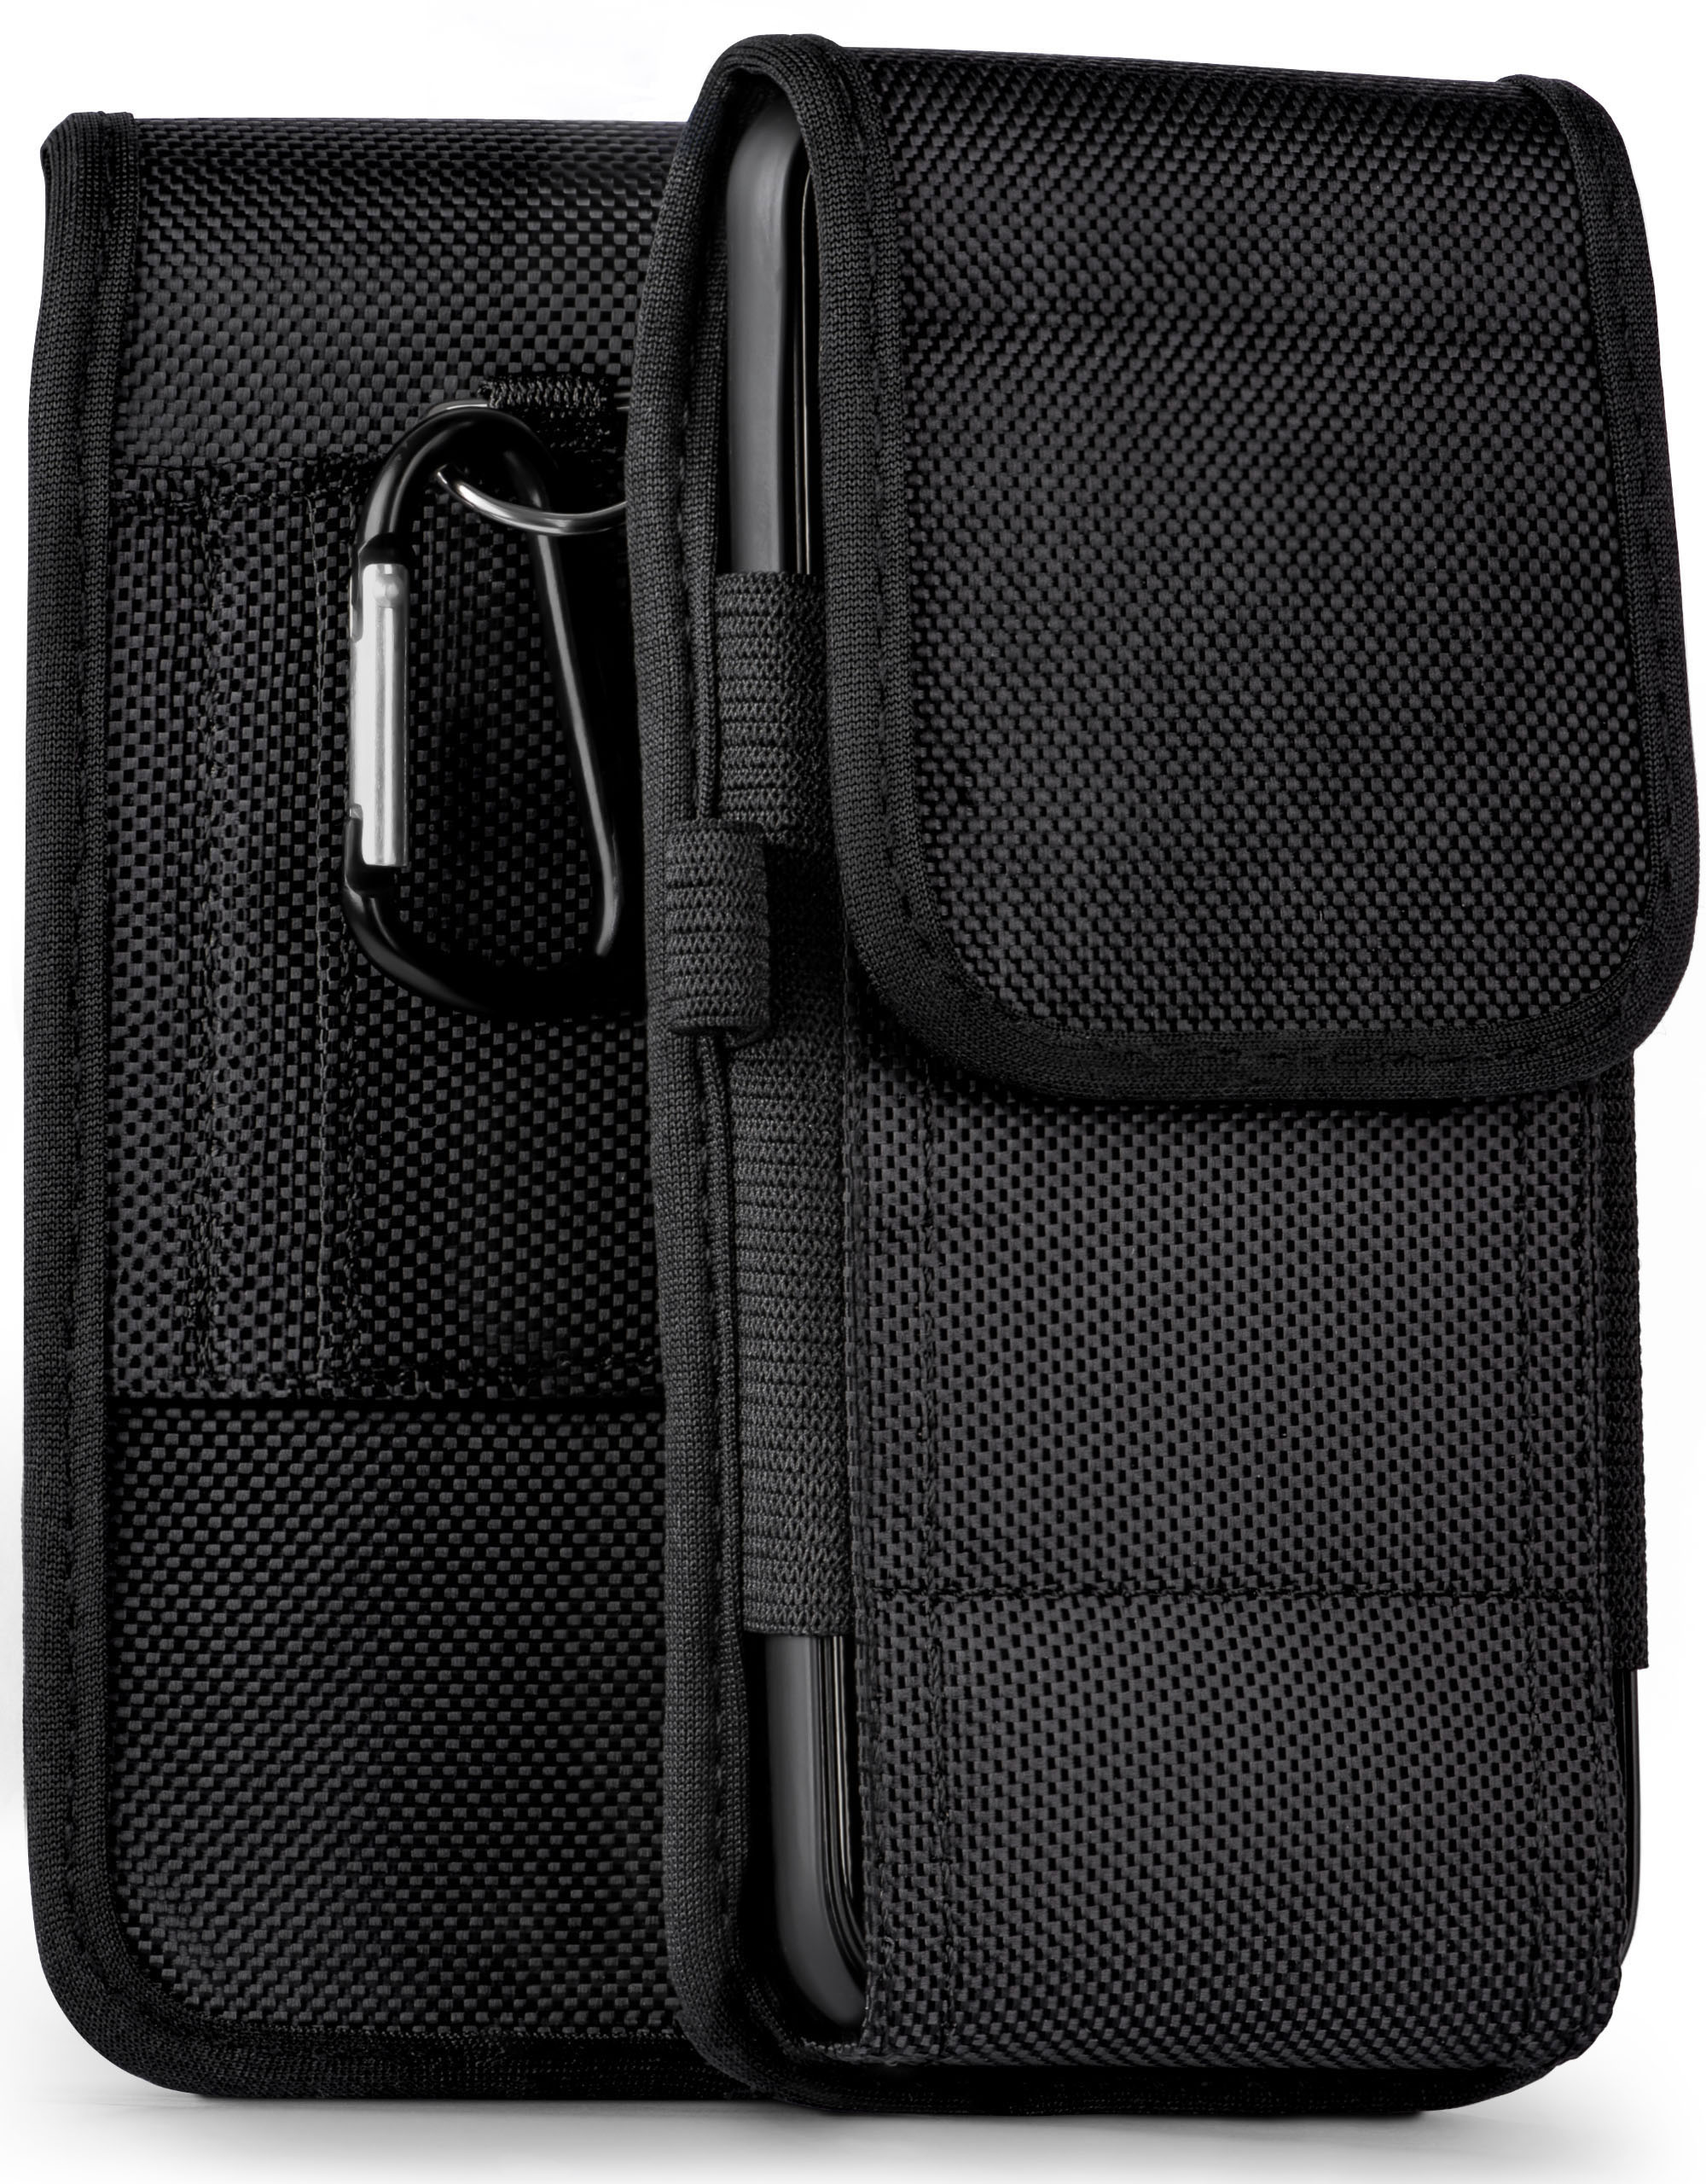 Trail (2017), Case, MOEX Huawei, Holster, Agility P smart